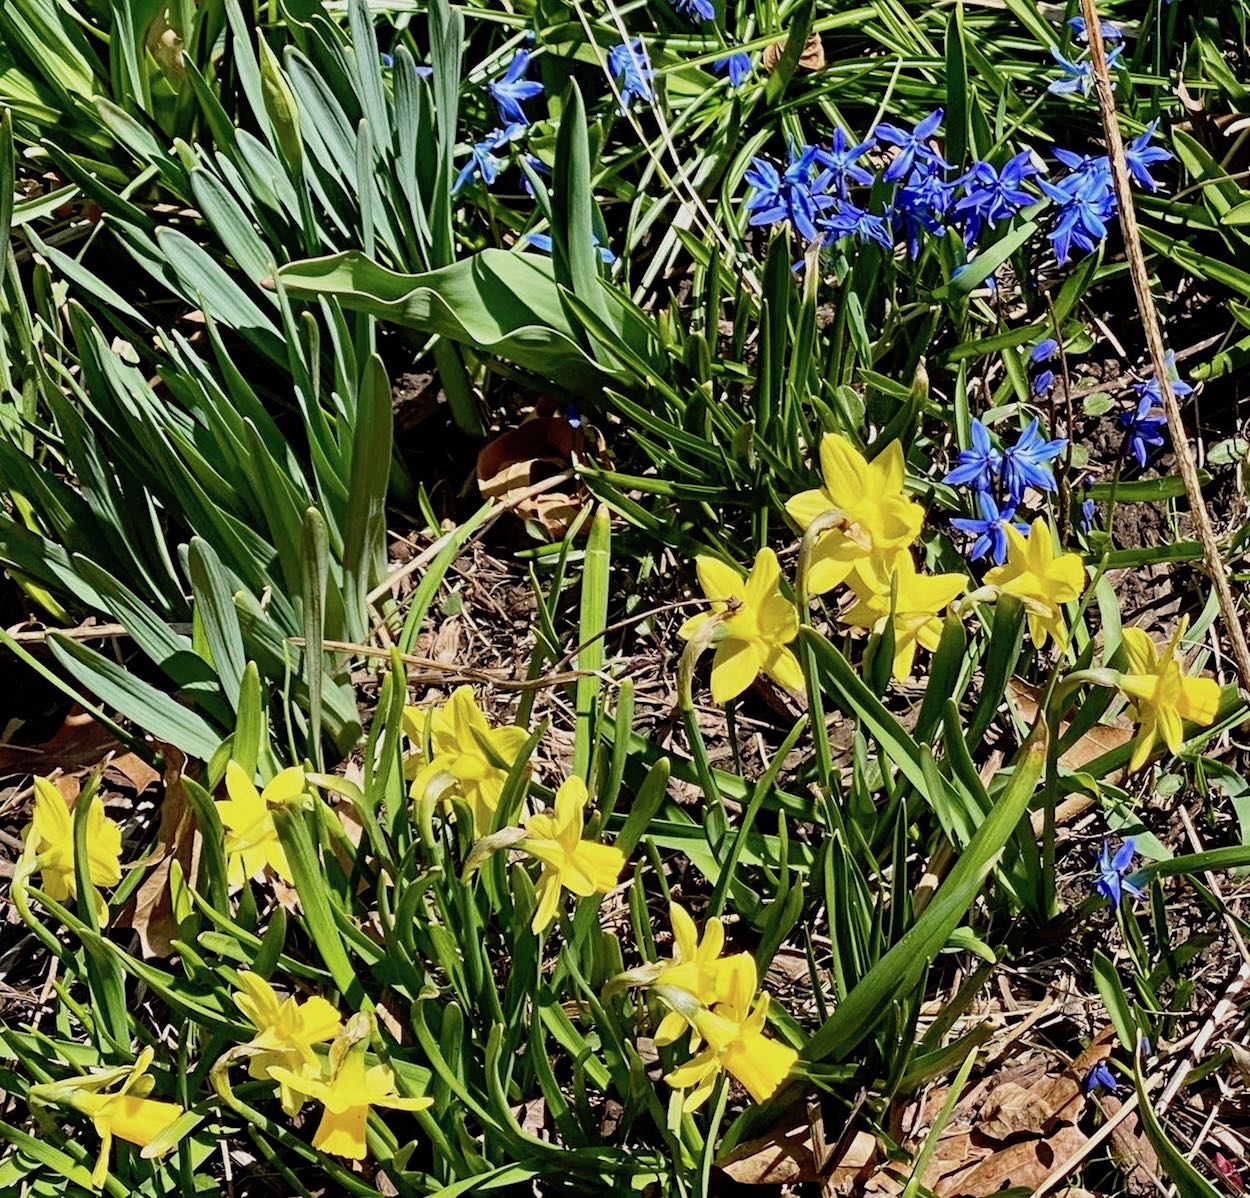 It's the weekend! Number 291, Tête-à-Tête daffodils and Chionodoxa Bloom in the Sun